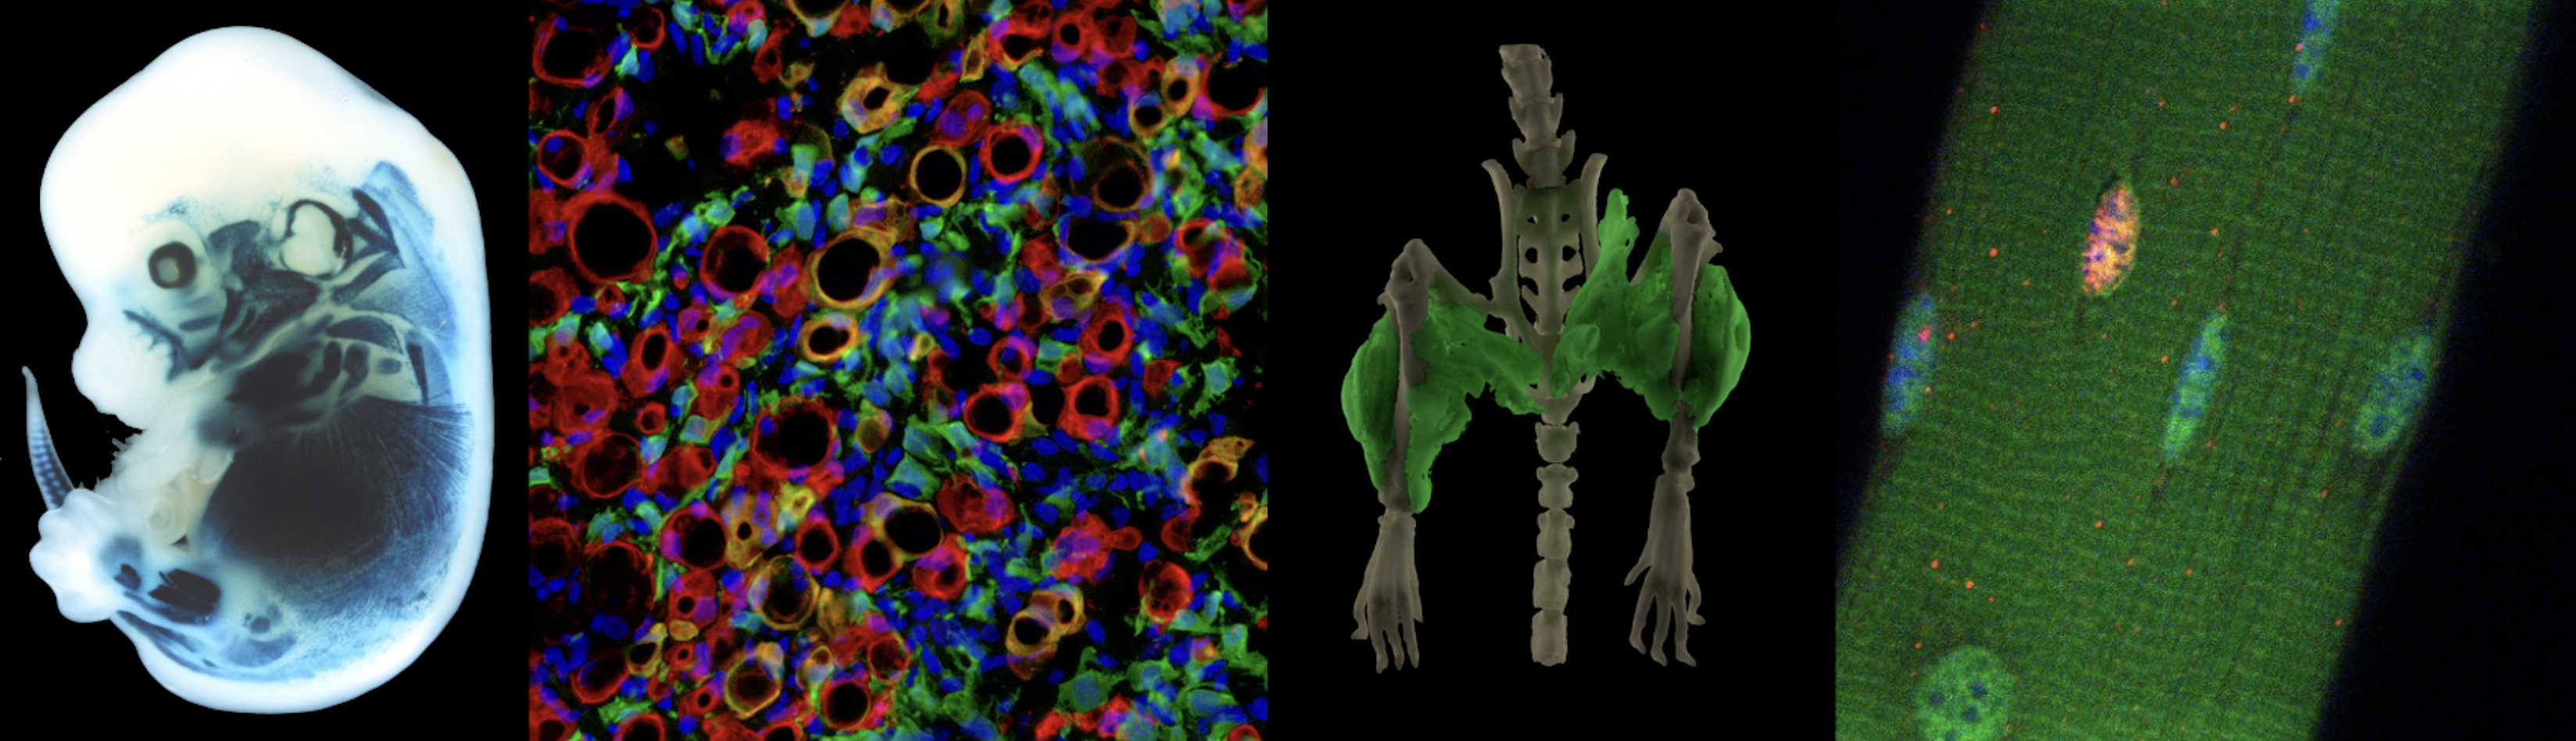 Colorful images that represent the different research areas of the lab’s work.